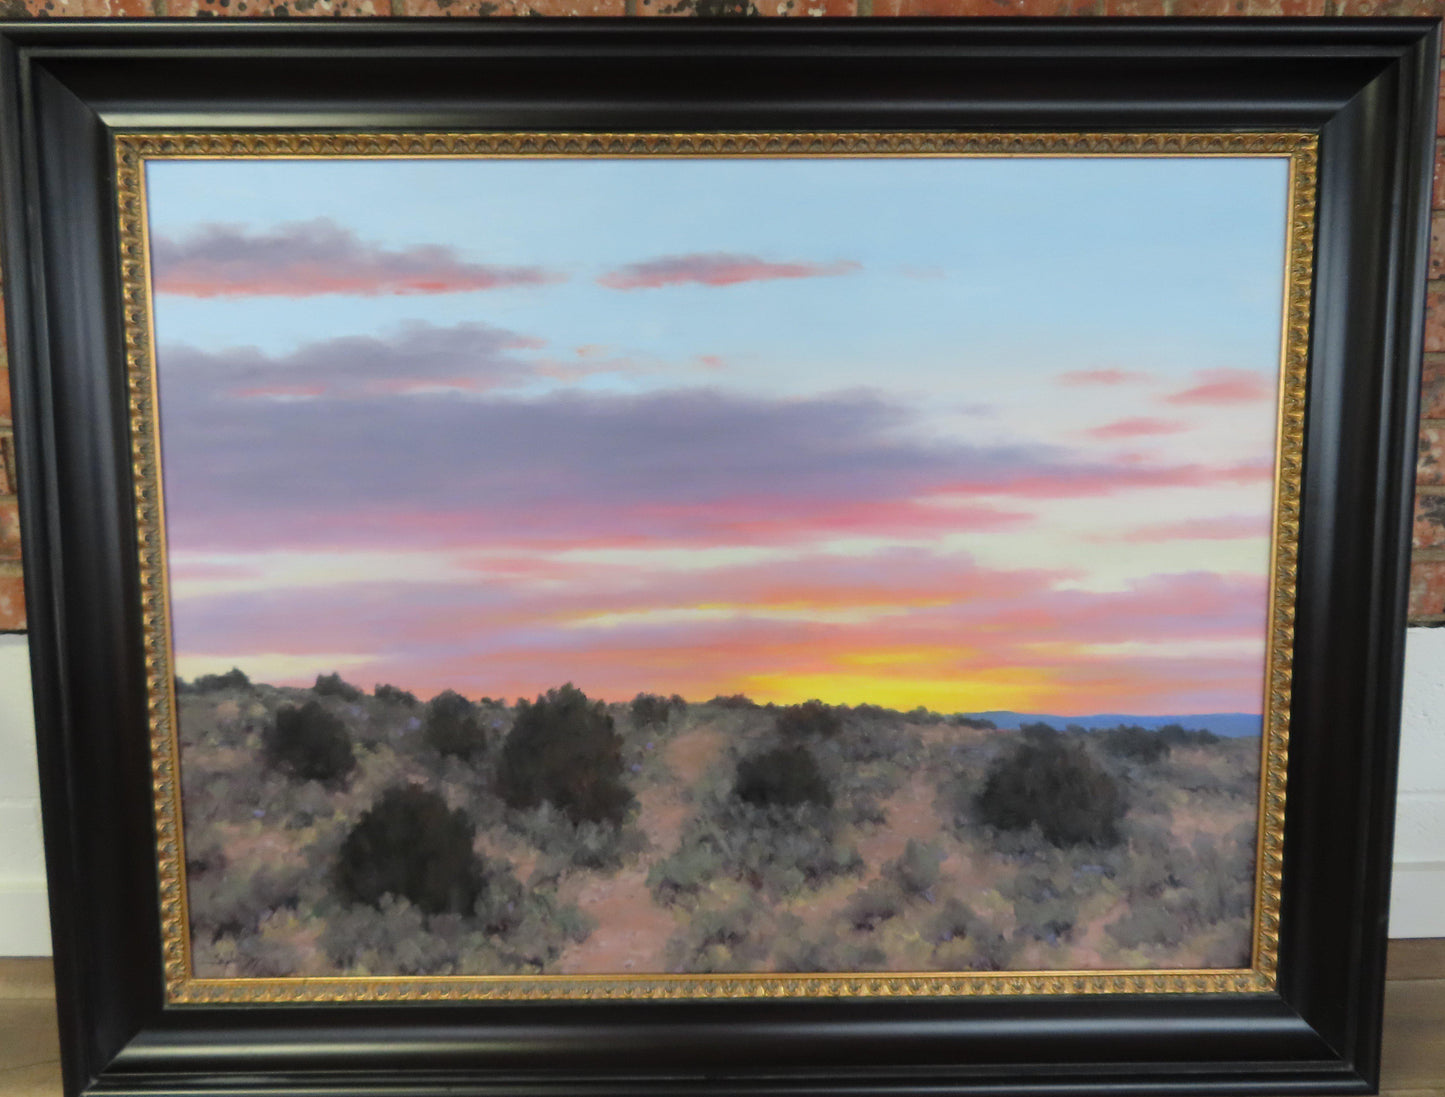 The Beauty of a New Mexico Evening-Painting-Stephen Day-Sorrel Sky Gallery